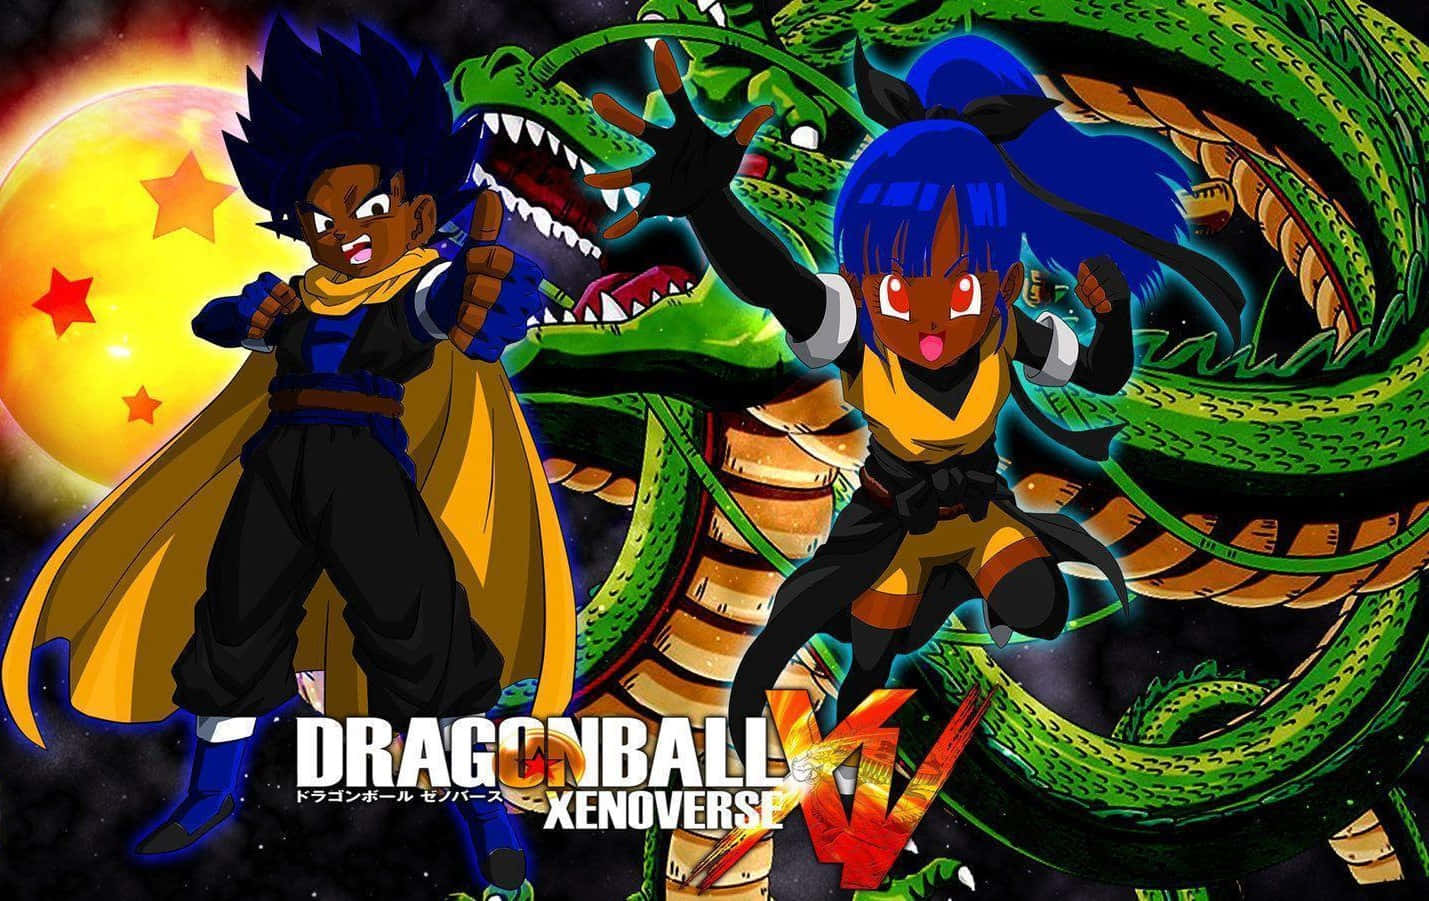 Fight as your favorite Dragon Ball Xenoverse fighter! Wallpaper